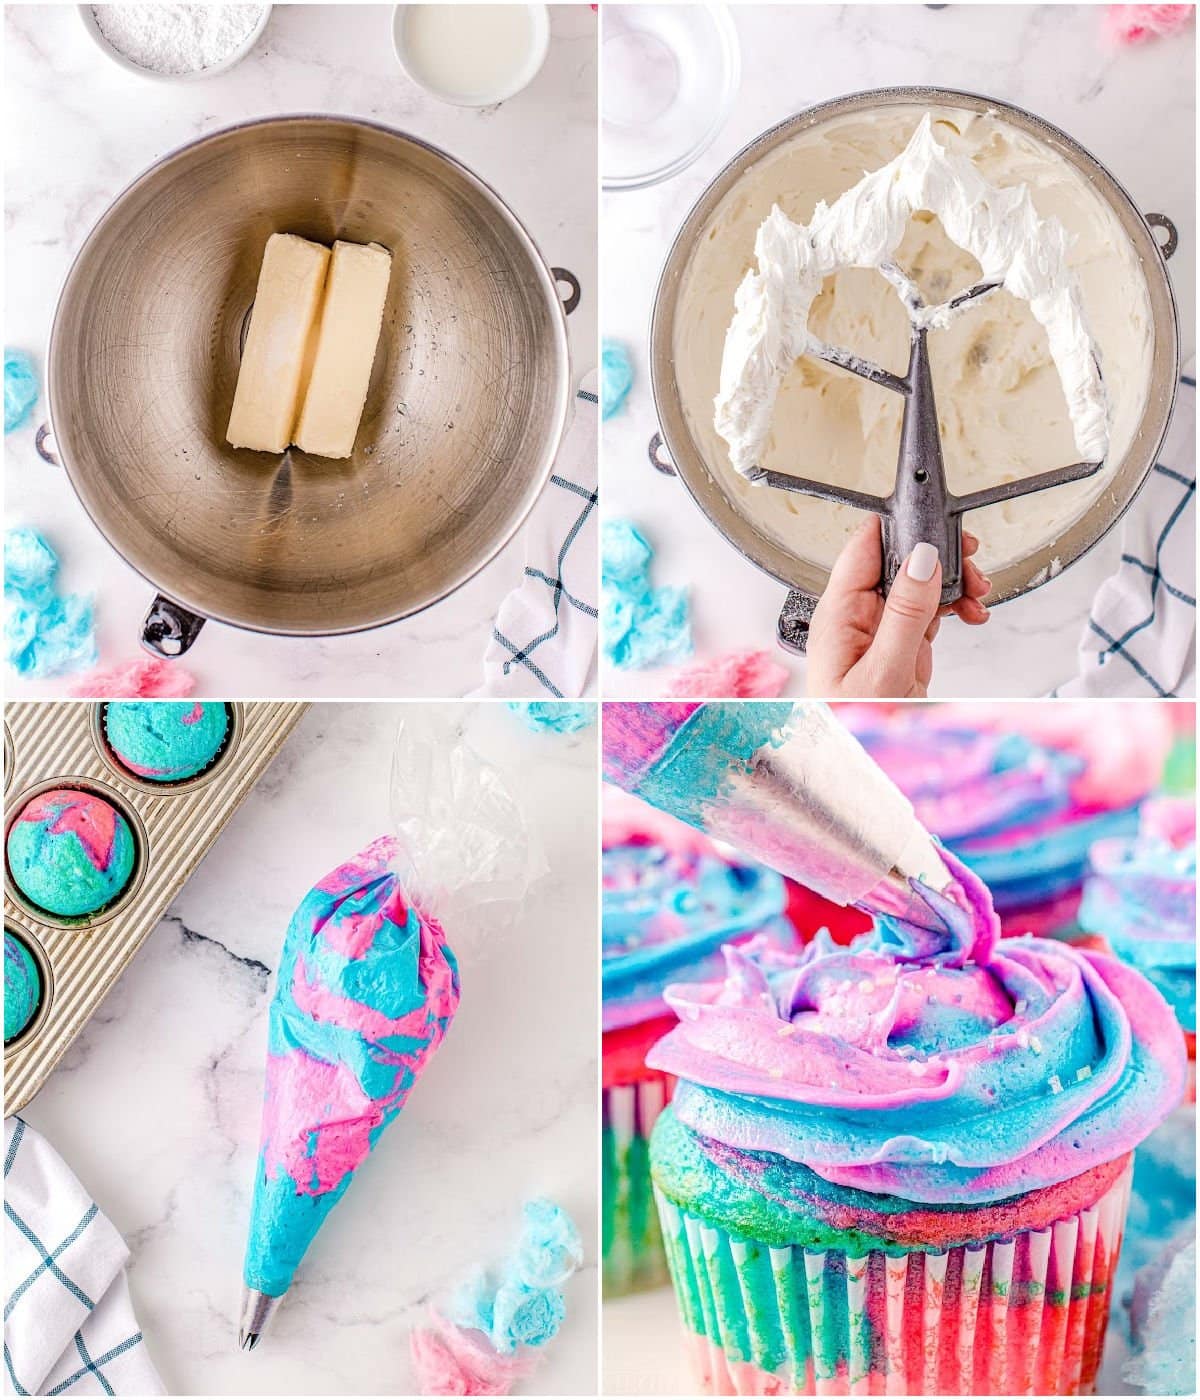 four image collage showing how to make swirled cotton candy flavored frosting.